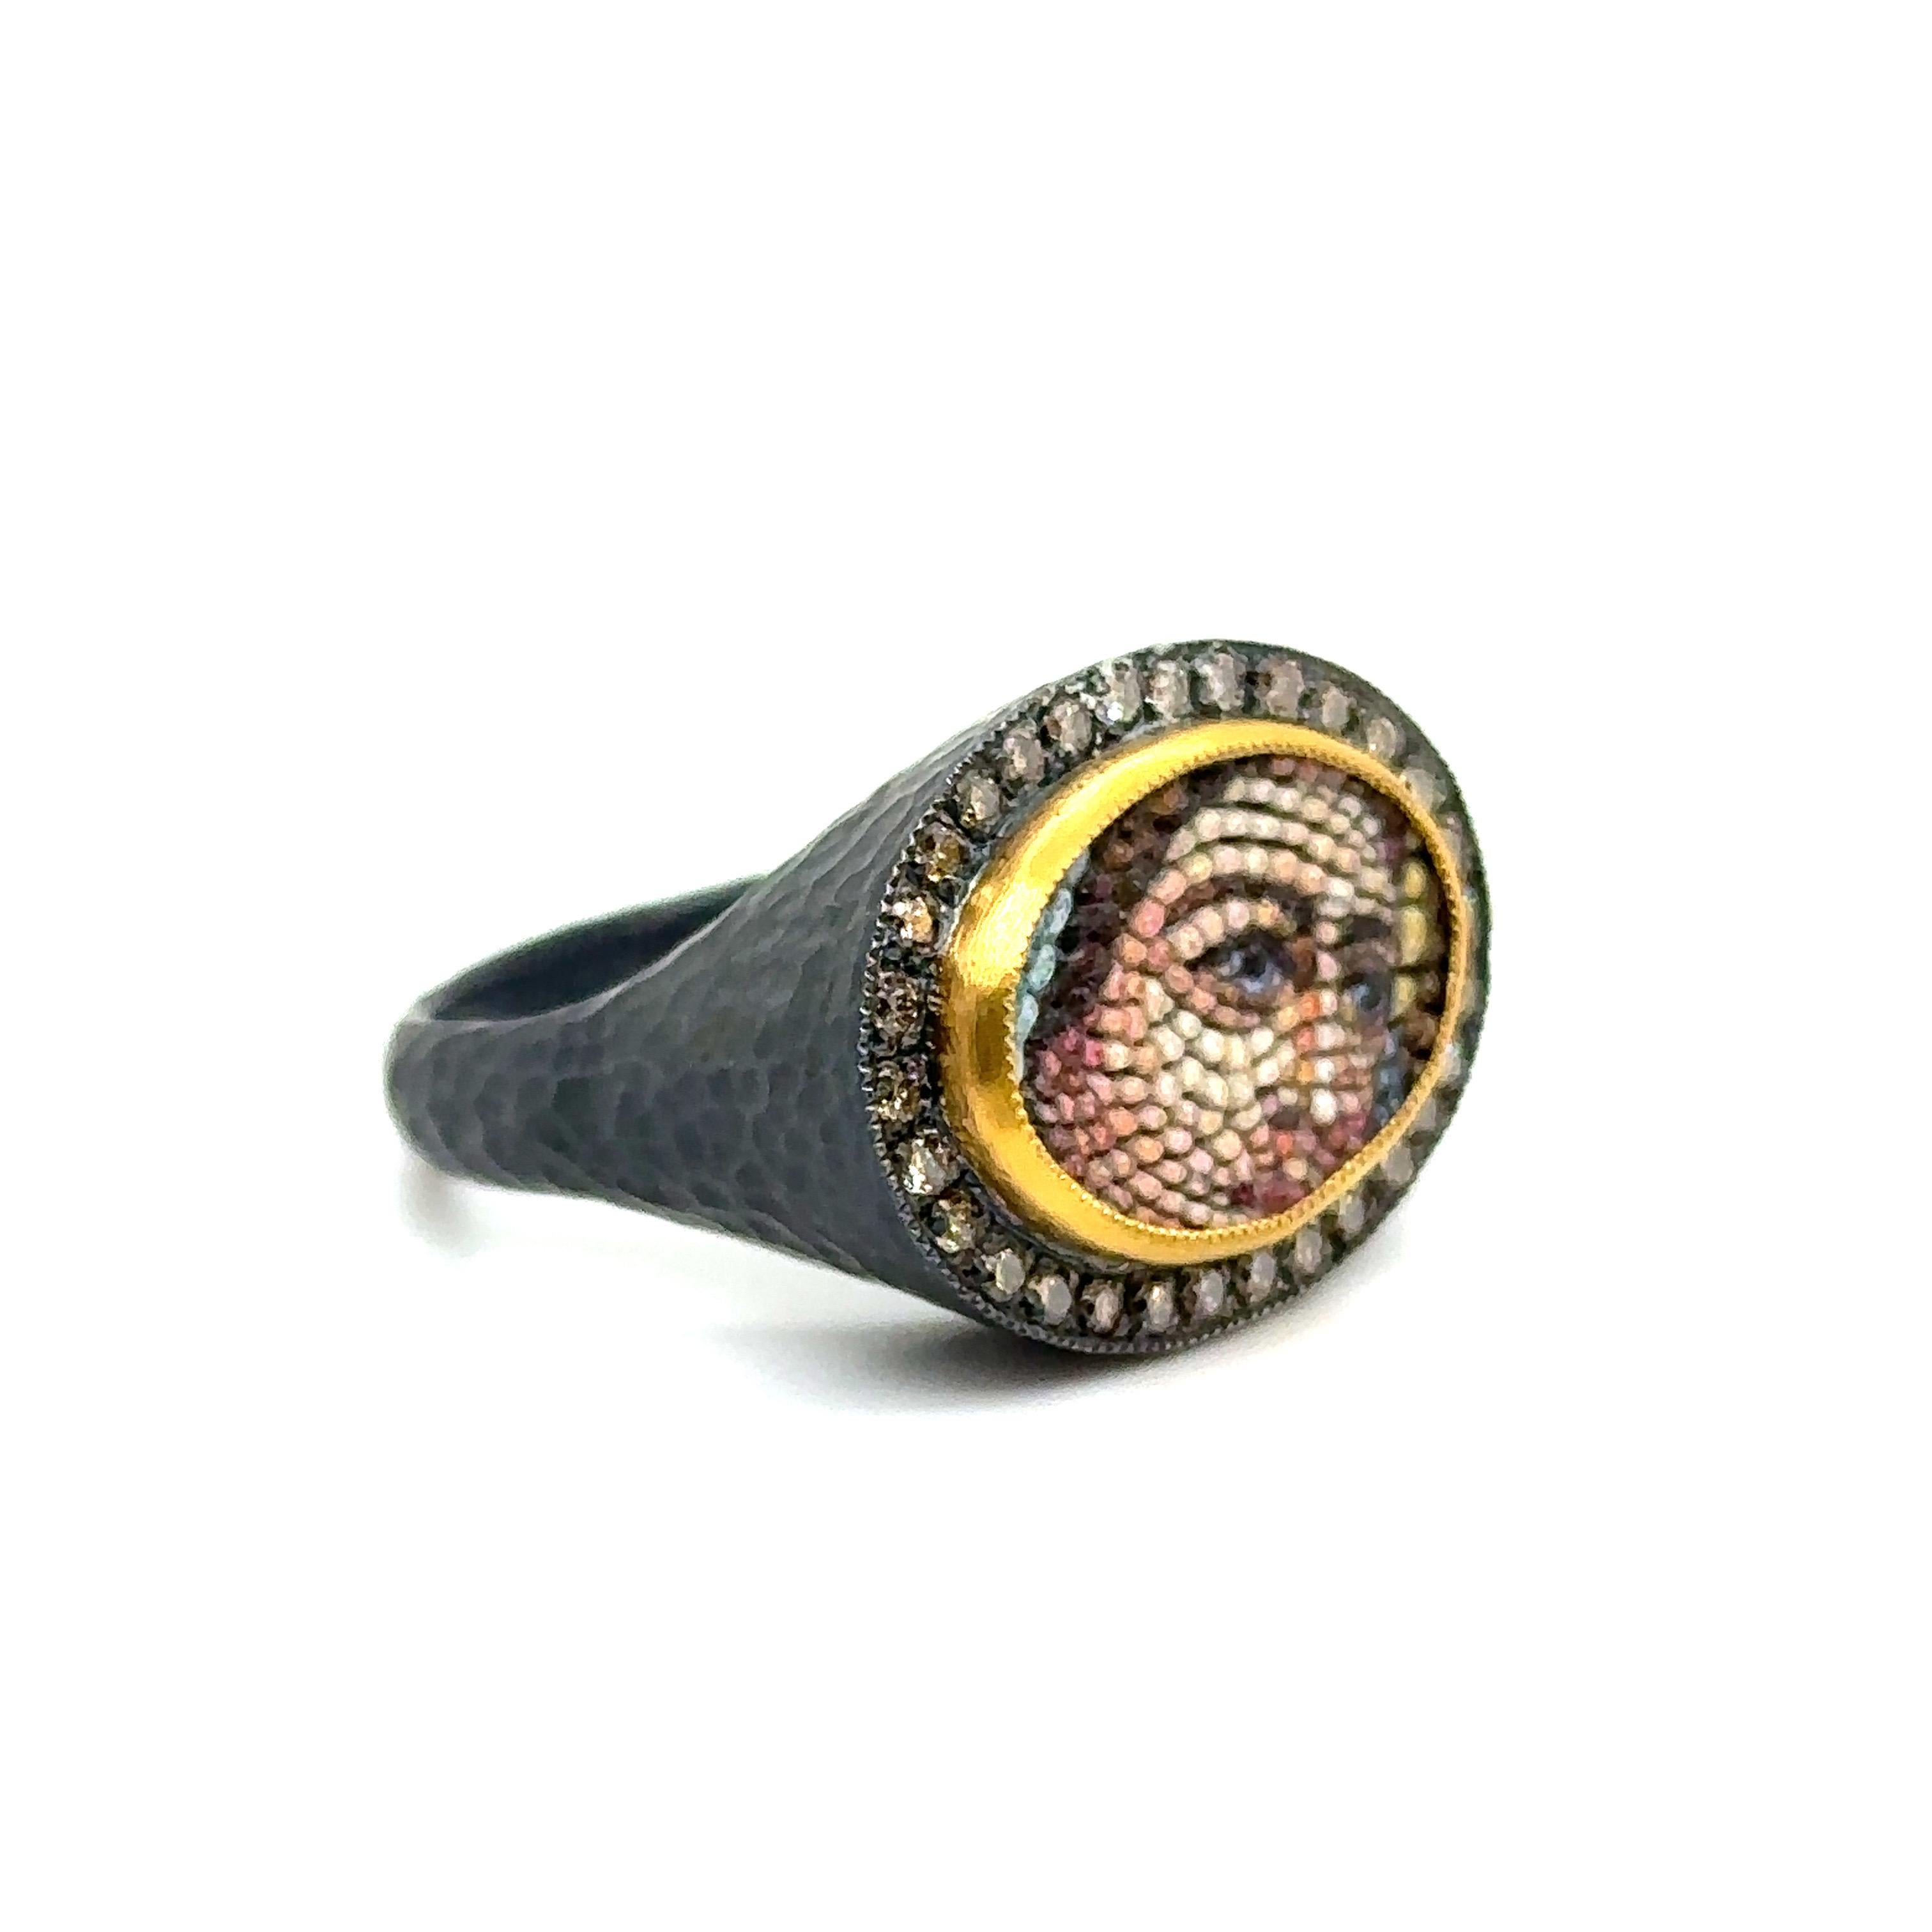 24KT GOLD/SS MOSAIC RING WITH DIAMONDS 
Metal: 24K GOLD/SS
Diamond Info: SI/12 CHAMPAGNE DIAMONDS 
Total Ct Weight: 0.50 cwt
Item Weight: 11.40 gm
Ring Size:  8 (Re-sizable)
Measurements:  18mm X 22.75mm X8.25mm
